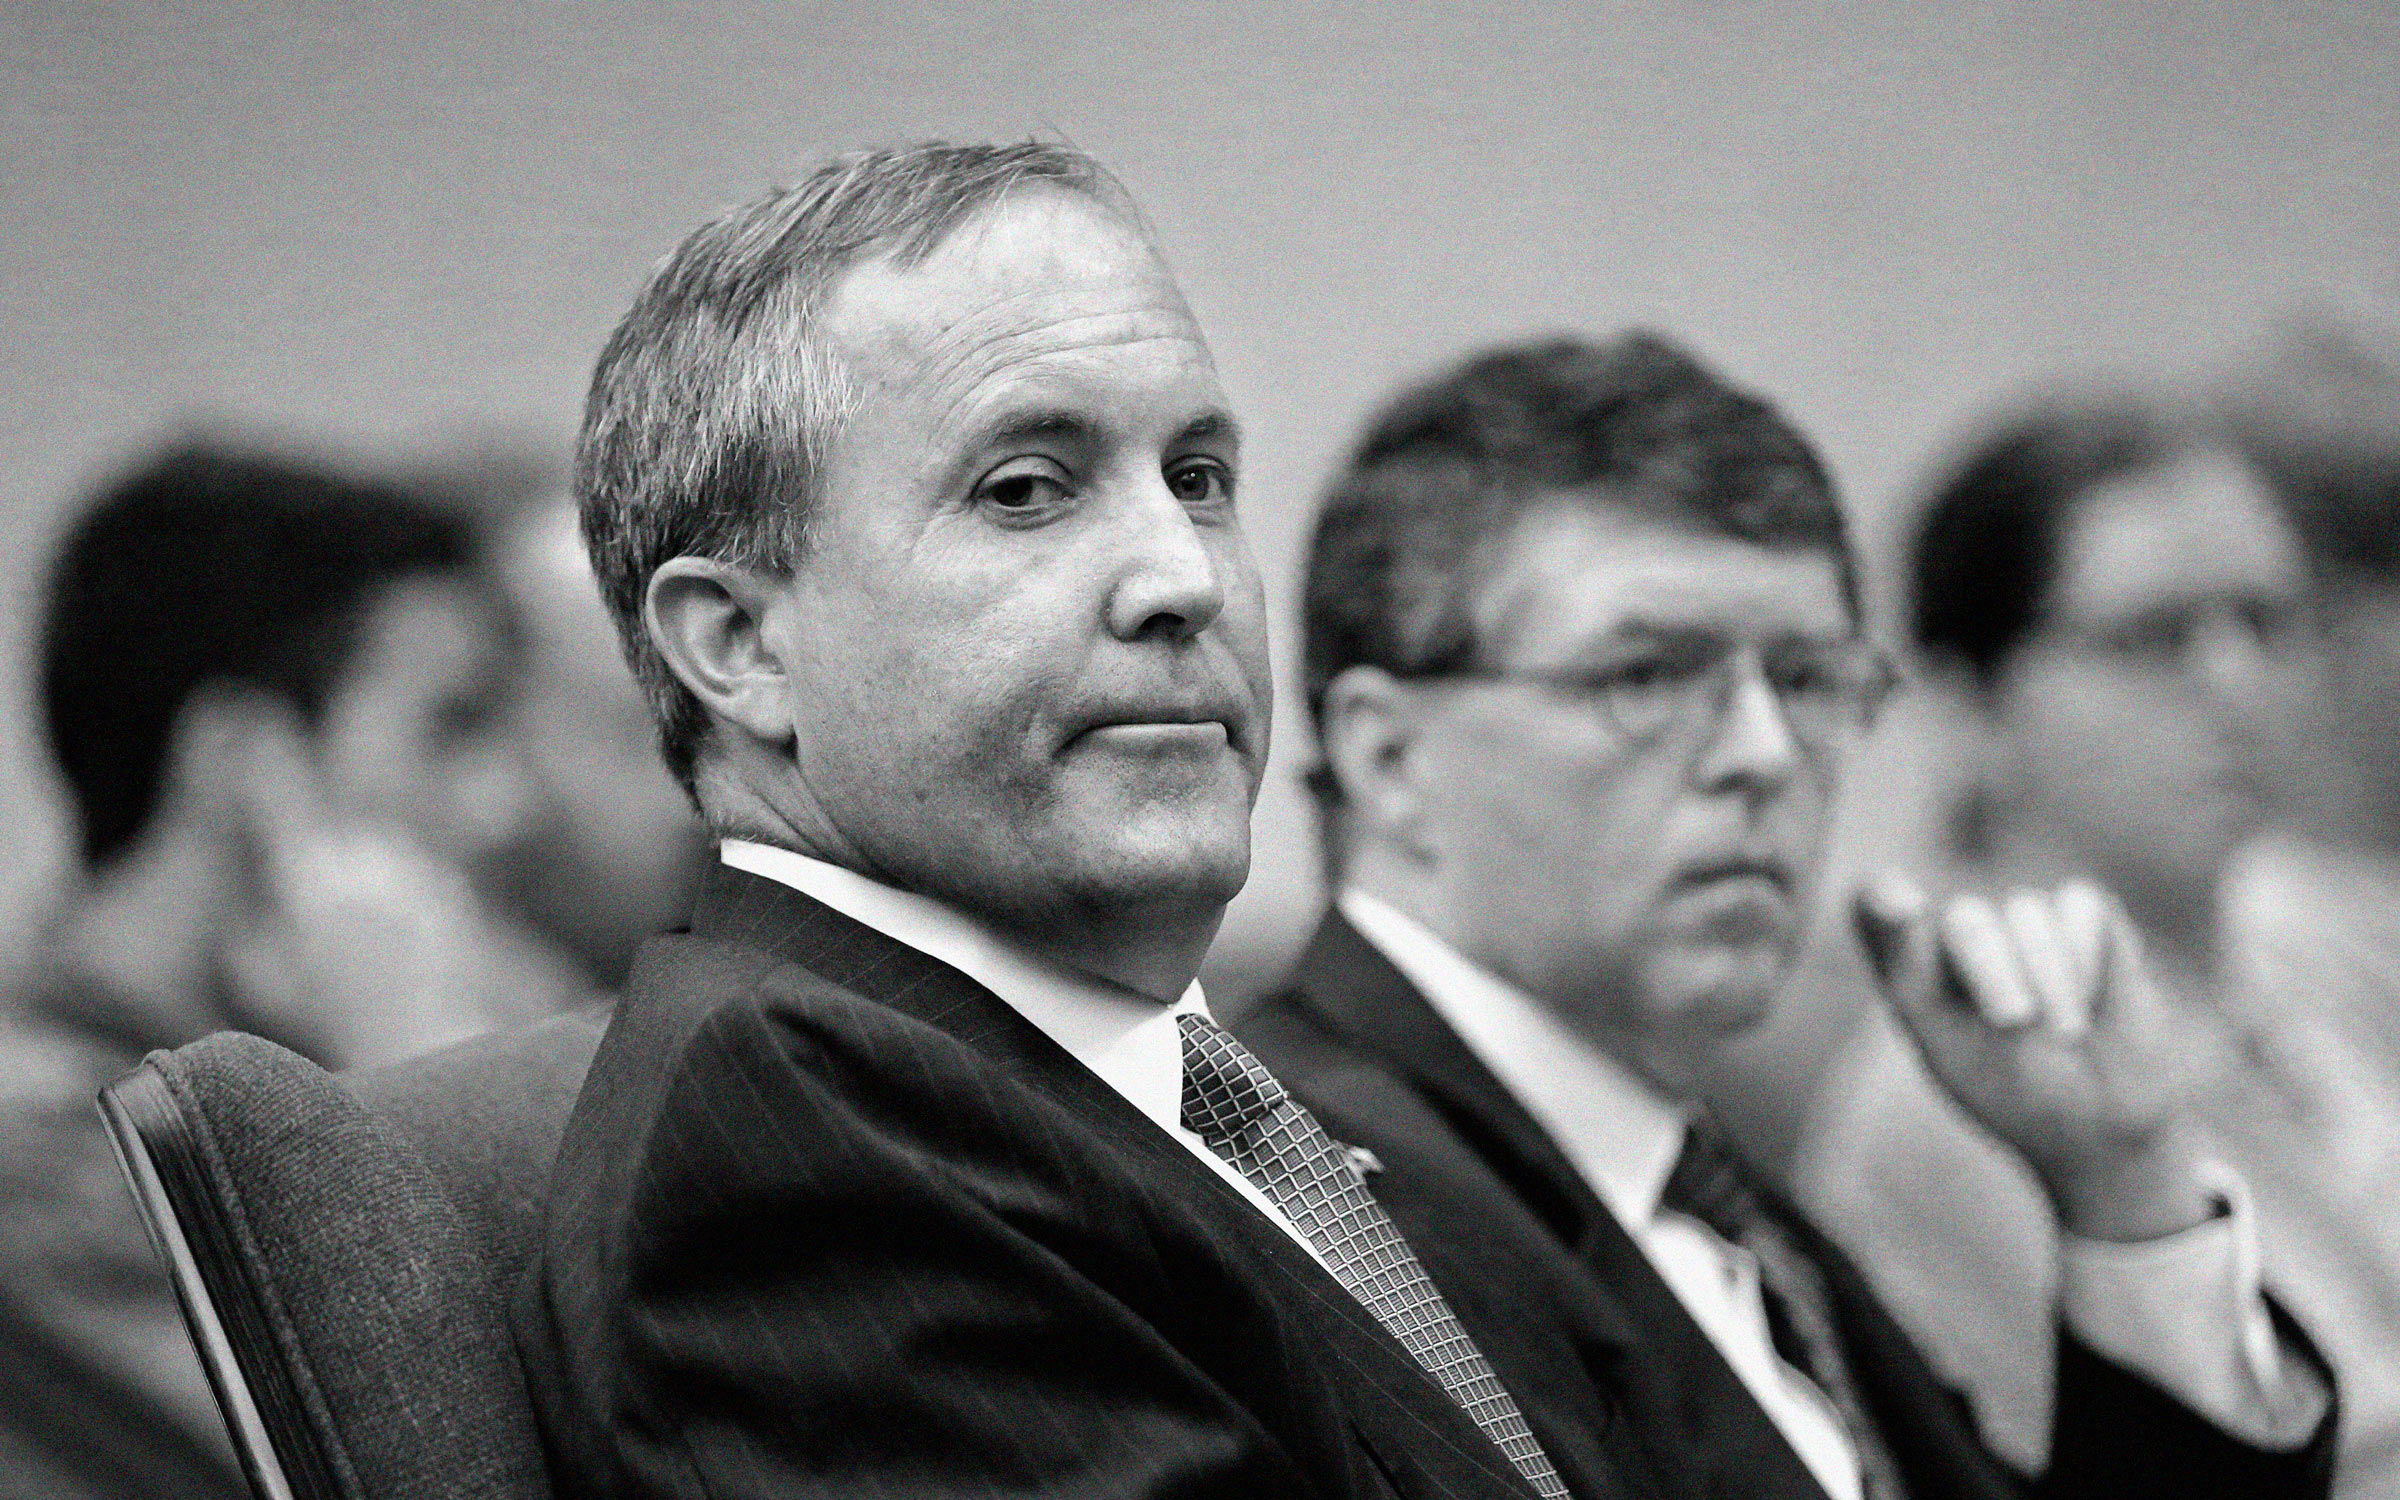 Is There Anything Ken Paxton Could Do to Turn Voters Against Him?